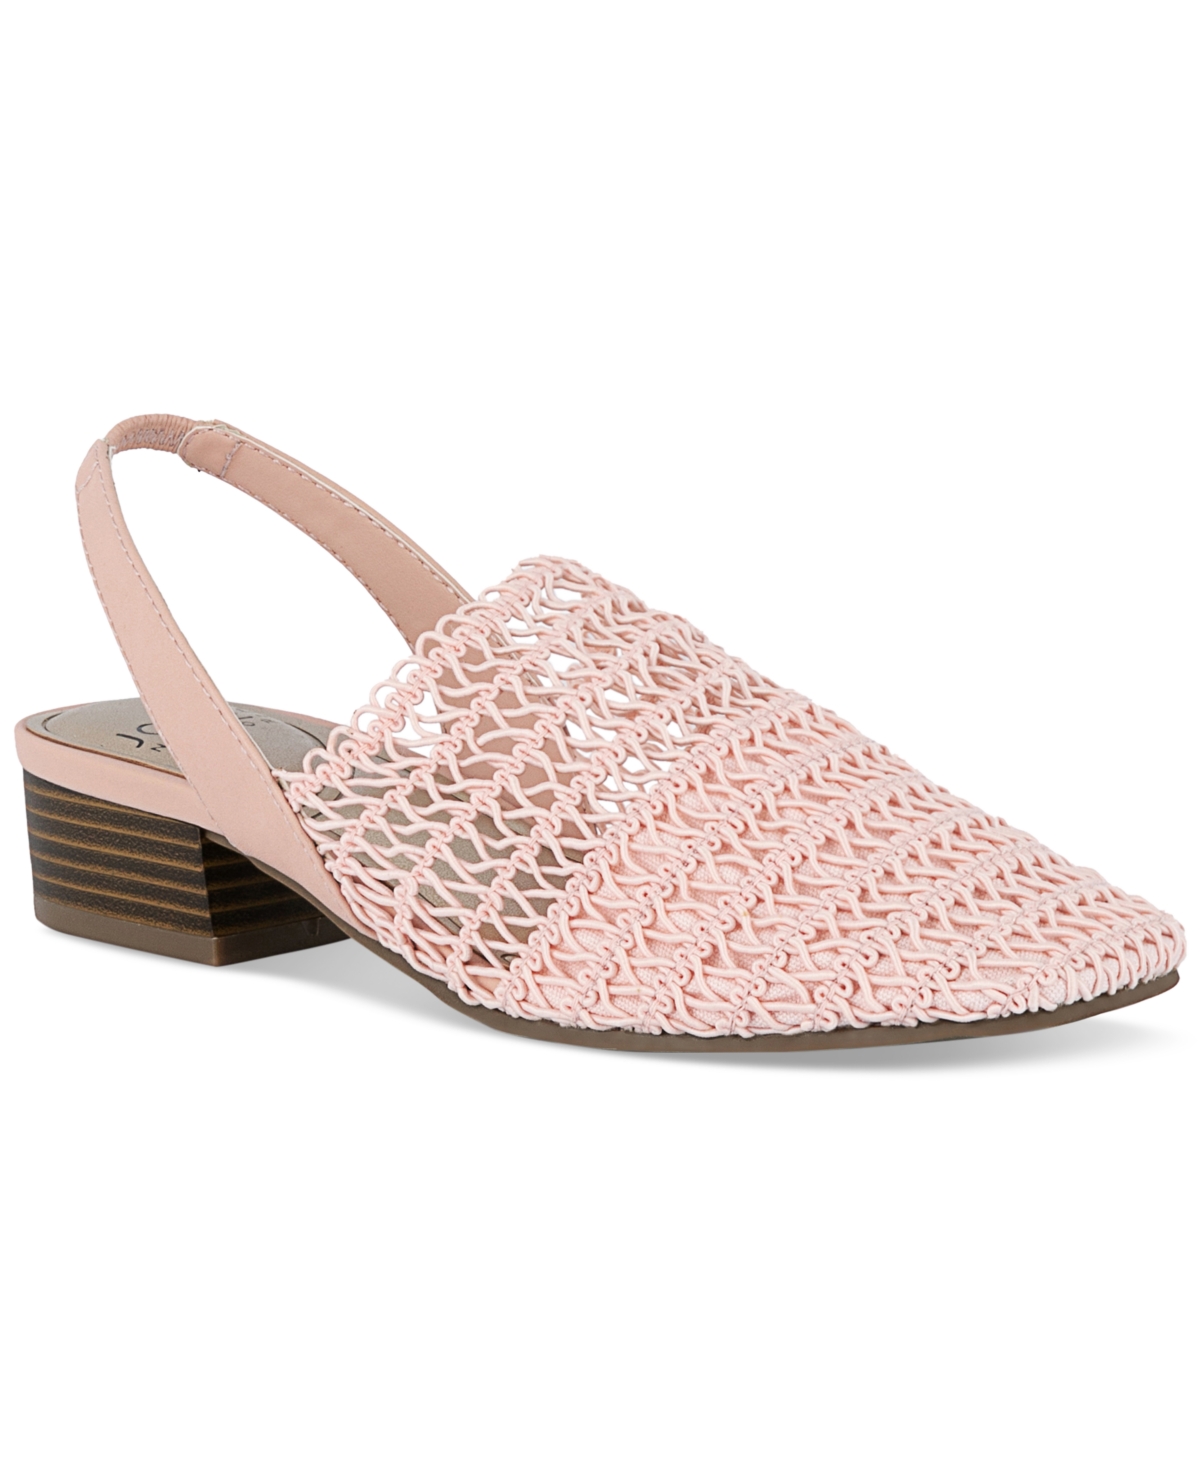 Women's Carolton Embroidered Slingback Flats - Rose Gold